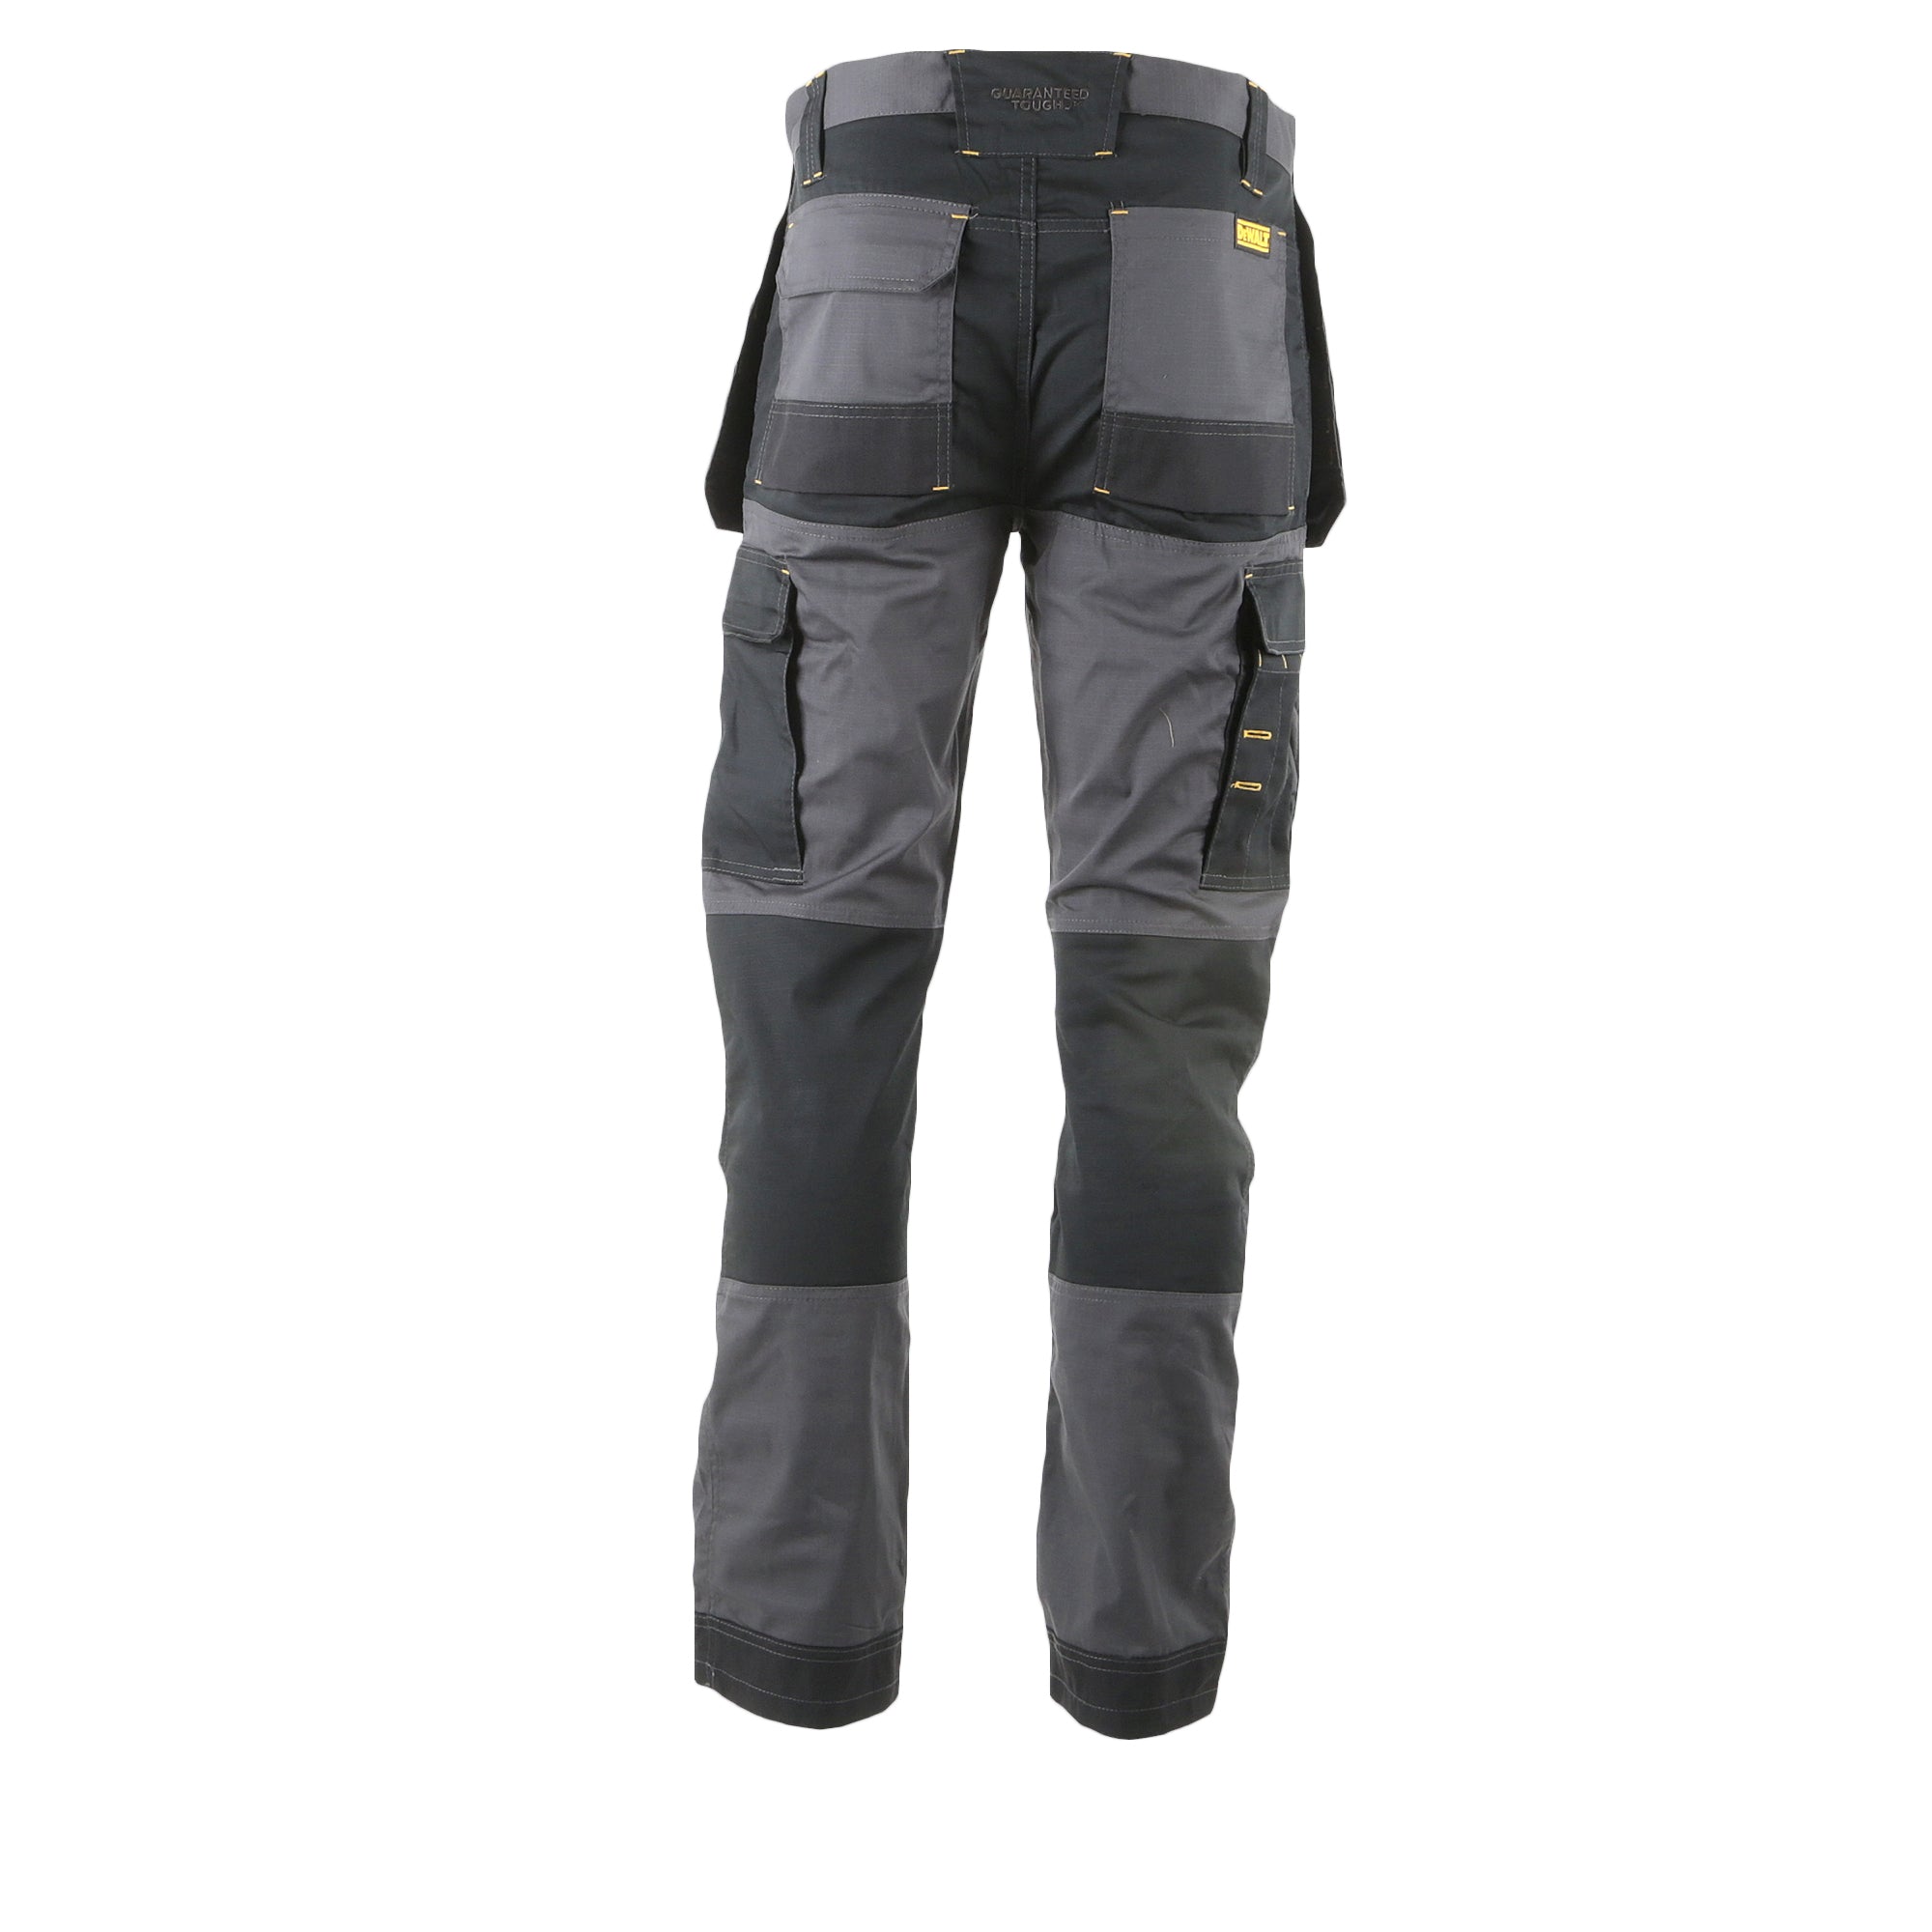 Caterpillar Workwear 1810099 Trade Stretch Pocket Trouser Black - Clothing  from MI Supplies Limited UK